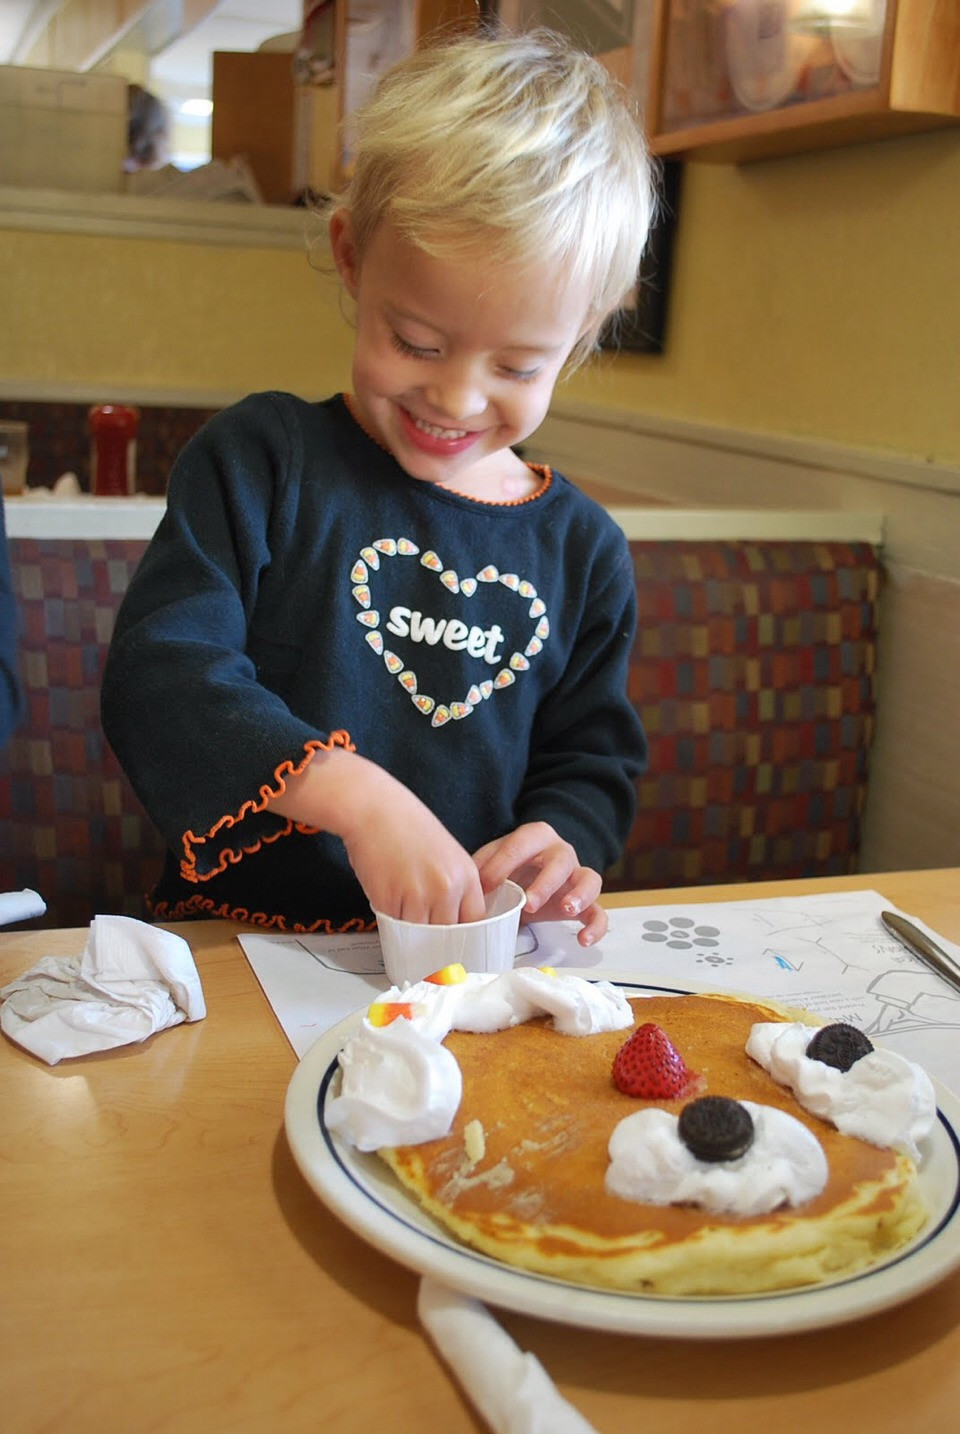 Ihop Halloween Free Pancakes 2019
 Halloween Special For Kids at IHOP by Lindsey Holmes Musely